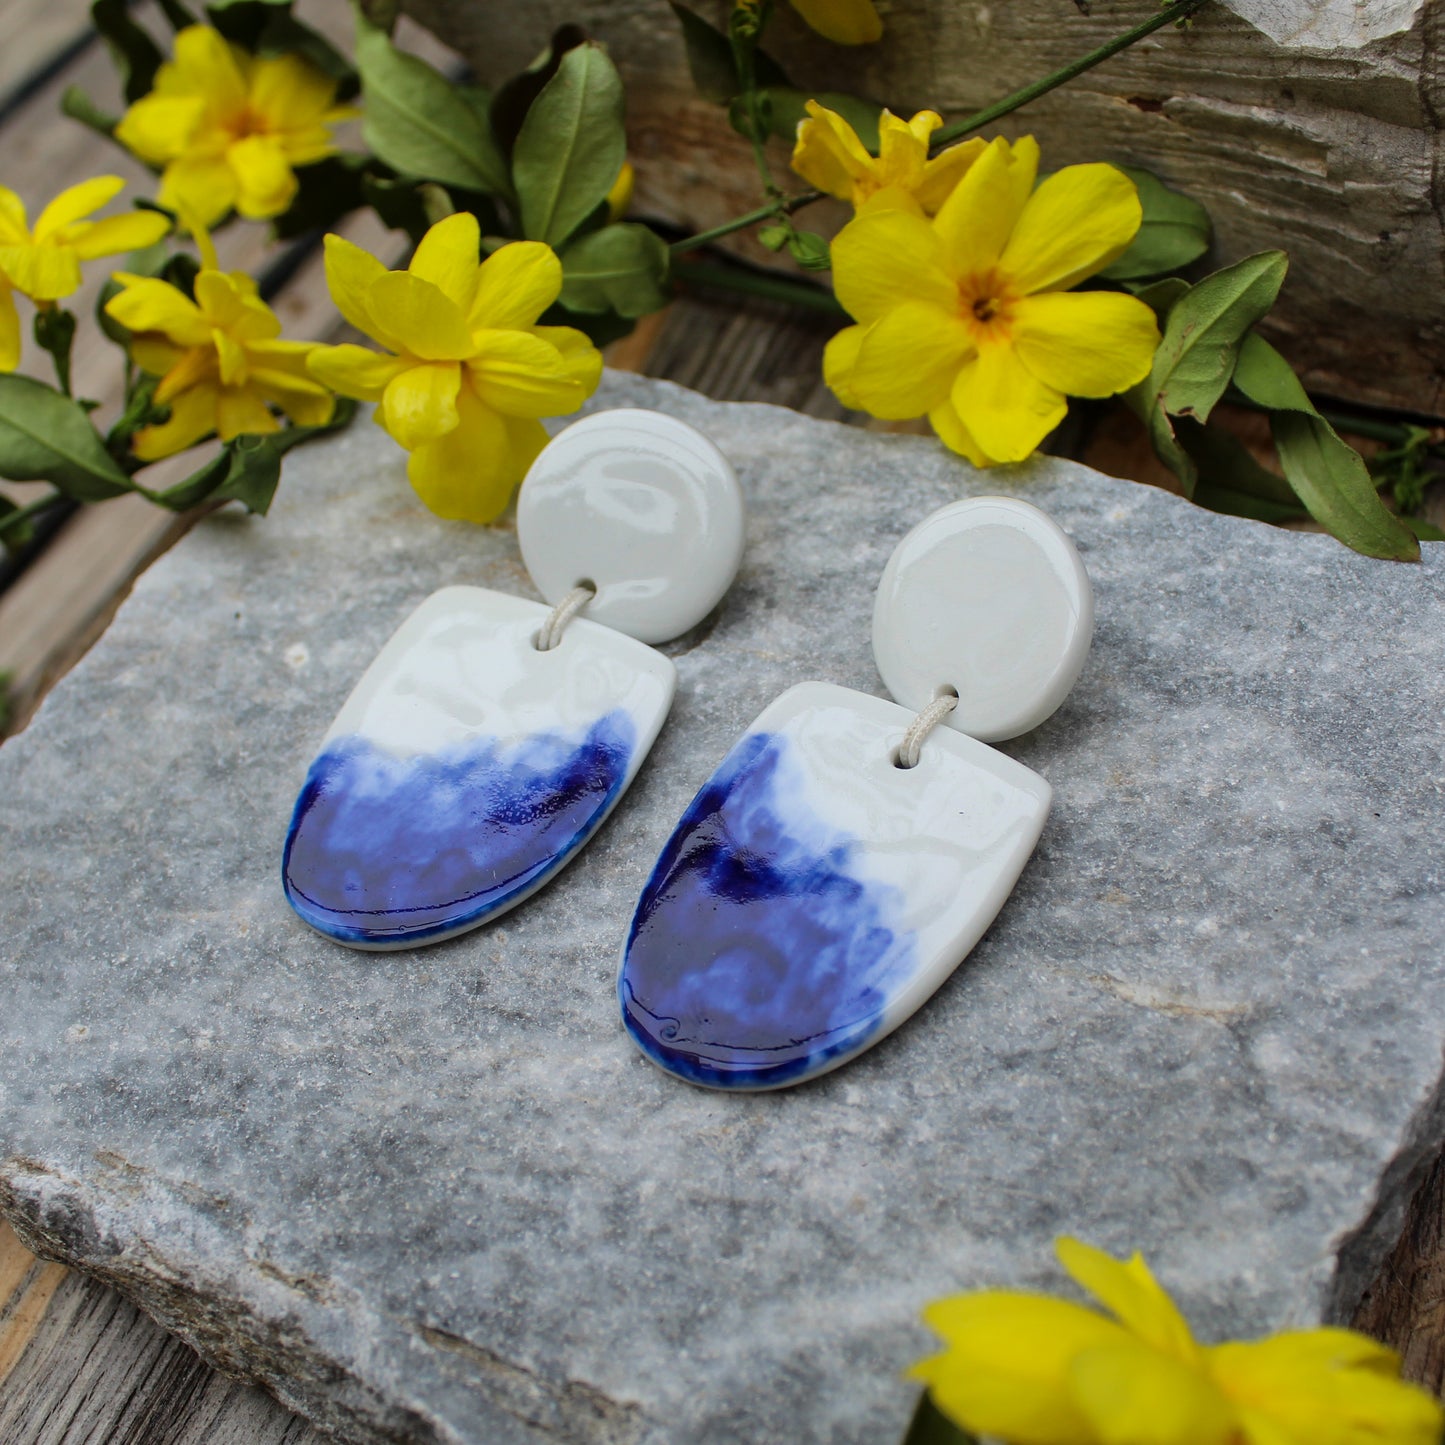 Drop porcelain earrings from white porcelain. Hand painted with blue oxide.